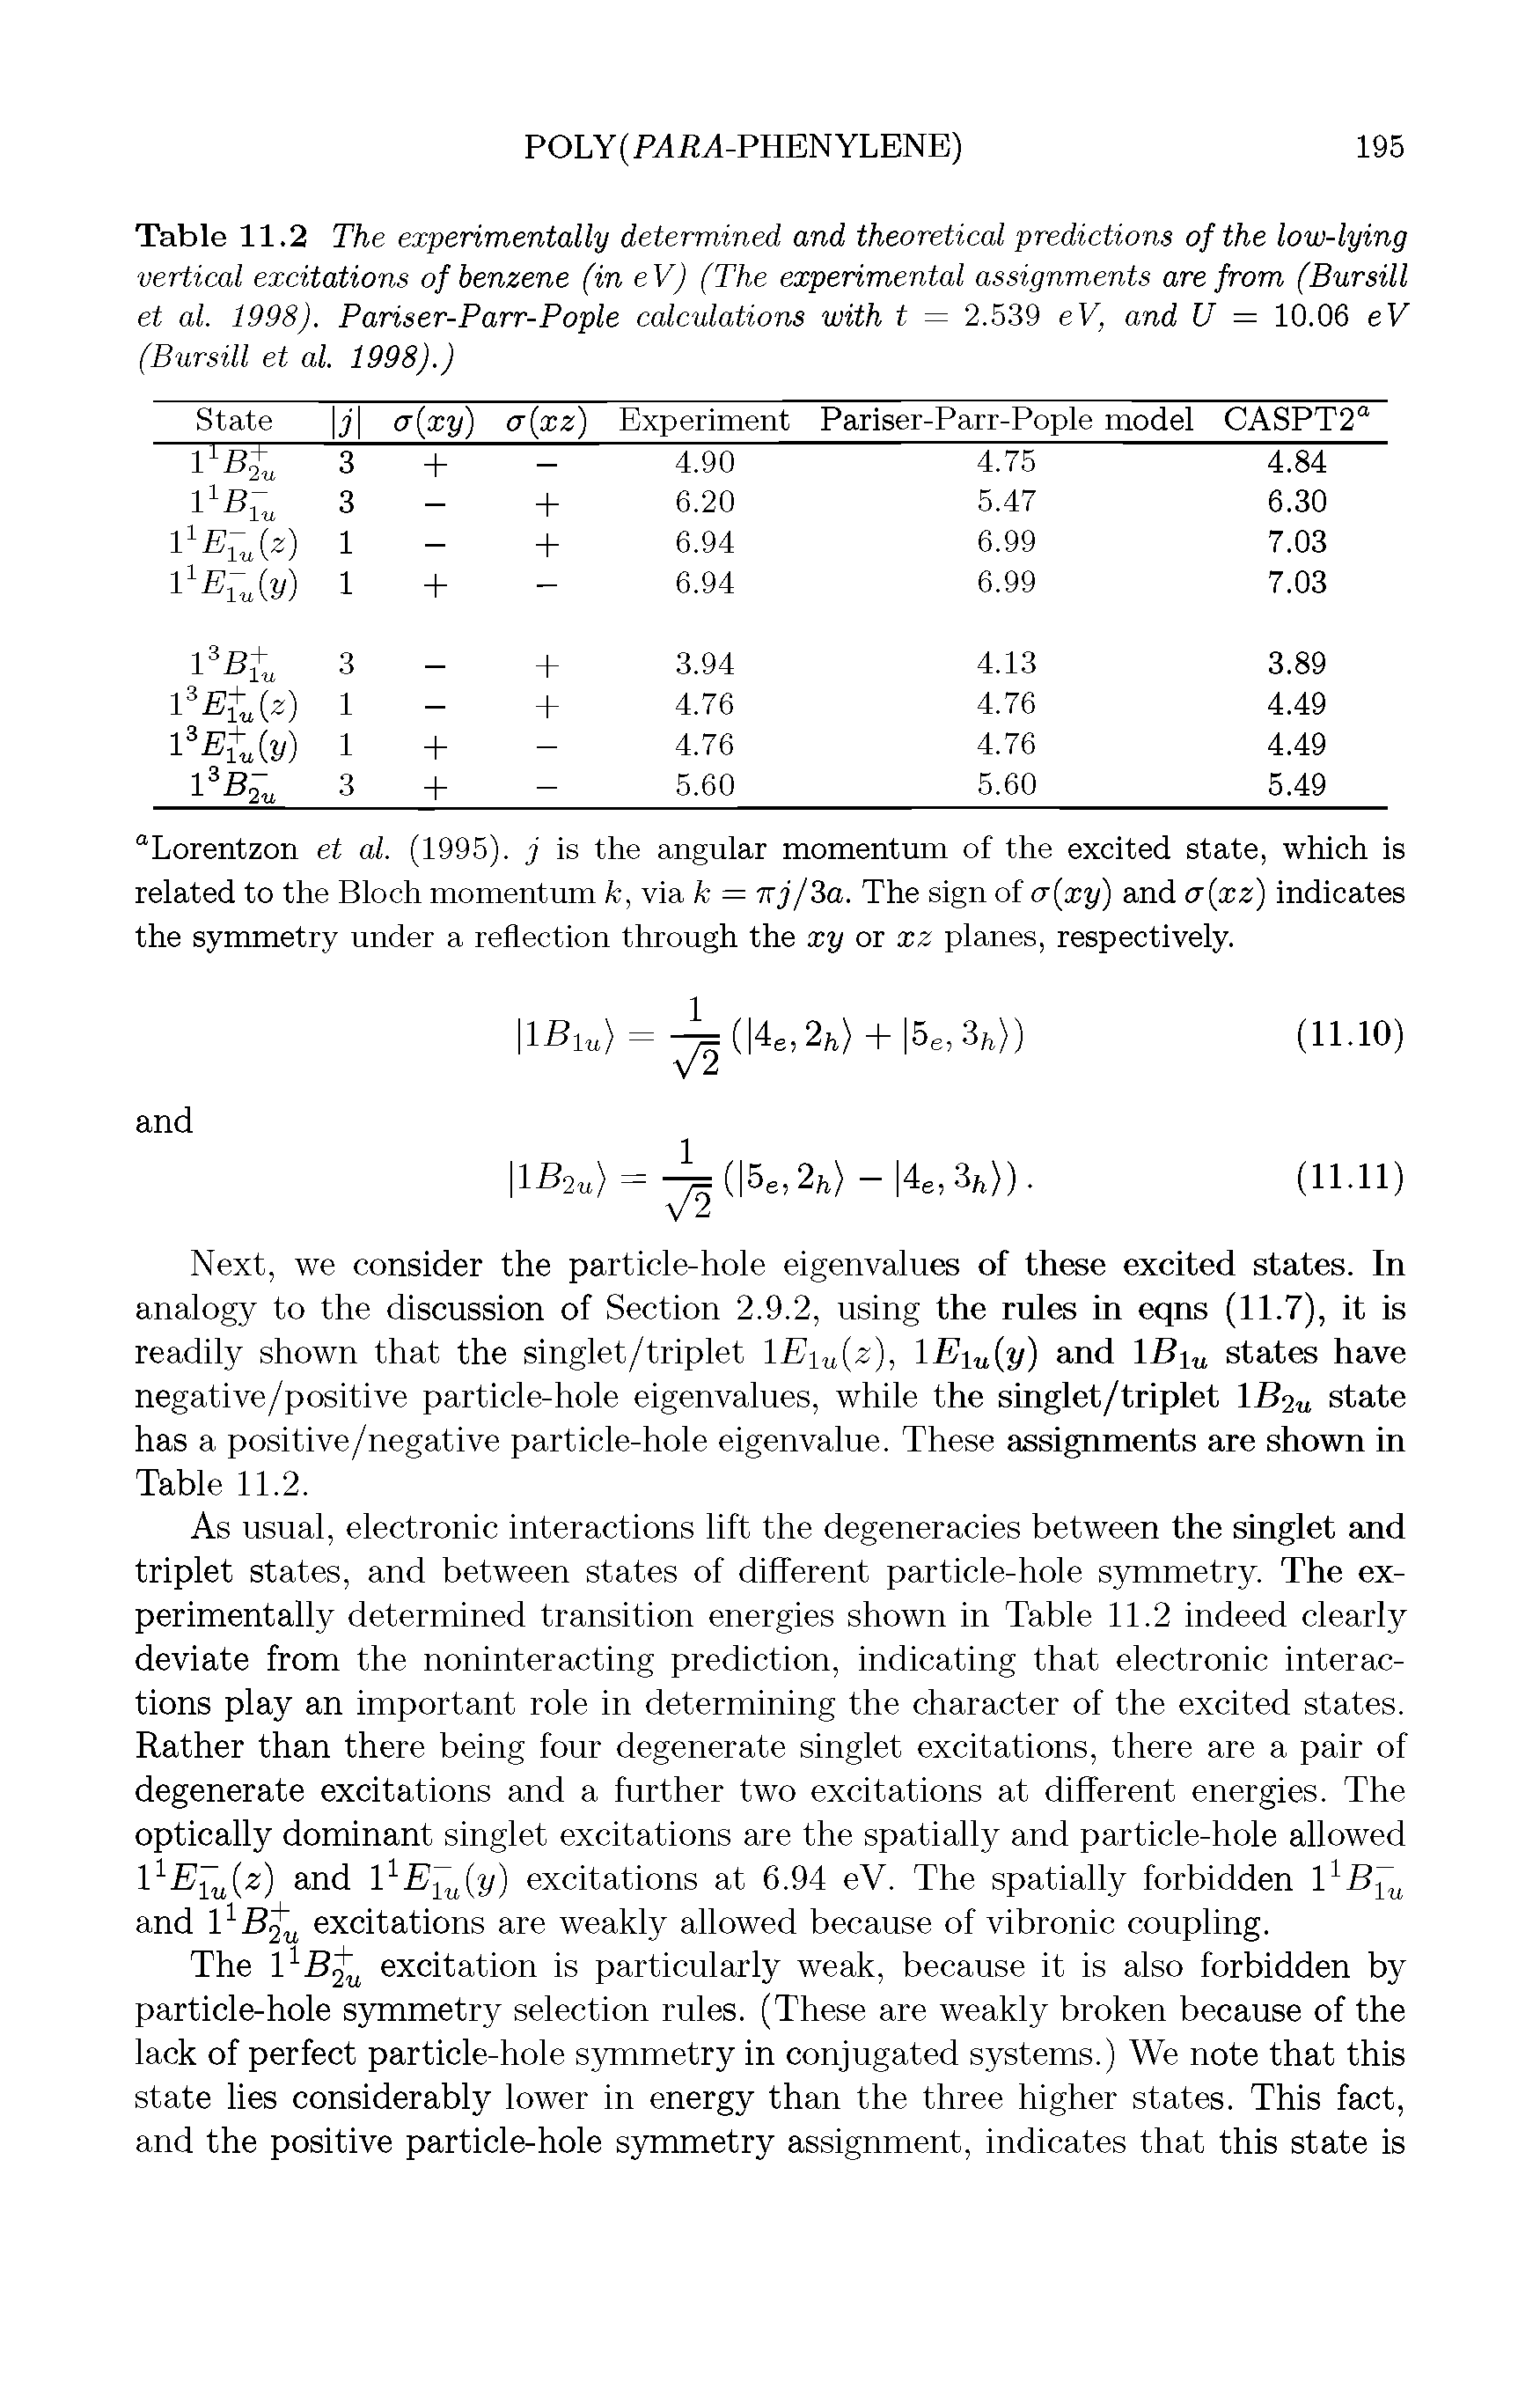 Table 11.2 The experimentally determined and theoretical predictions of the low-lying vertical excitations of benzene (in eV) (The experimental assignments are from (Bursill et al. 1998). Pariser-Parr-Pople calculations with t = 2.539 eV, and U = 10.06 eV (Bursill et al. 1998).)...